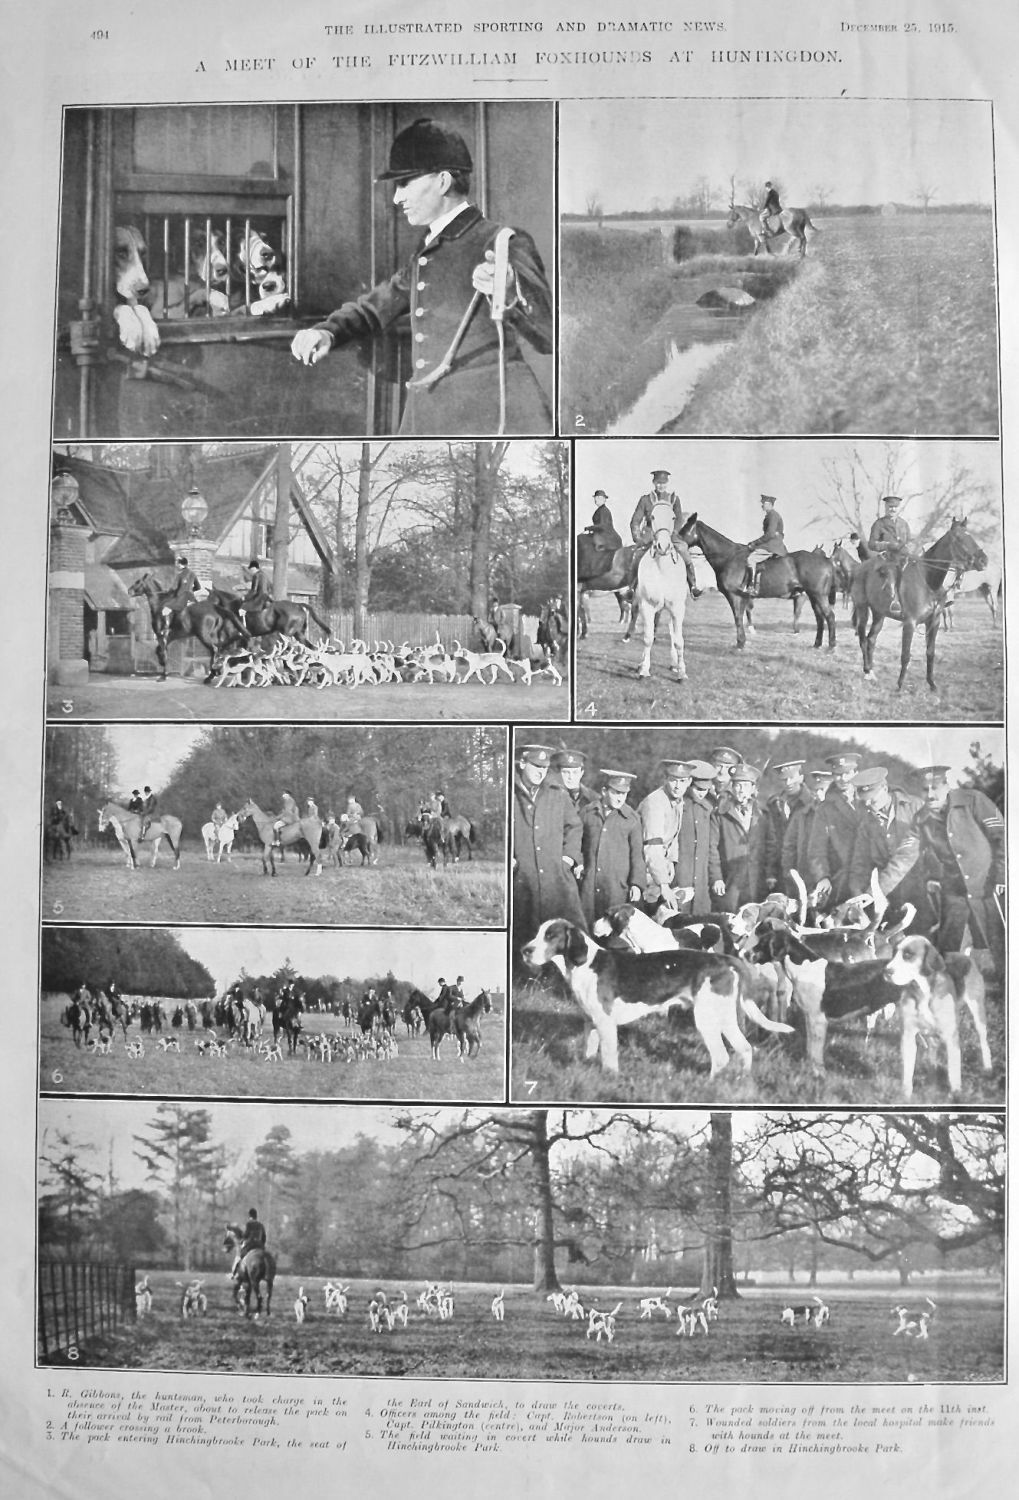 A Meet of the Fitzwilliam Foxhounds at Huntingdon. 1915.